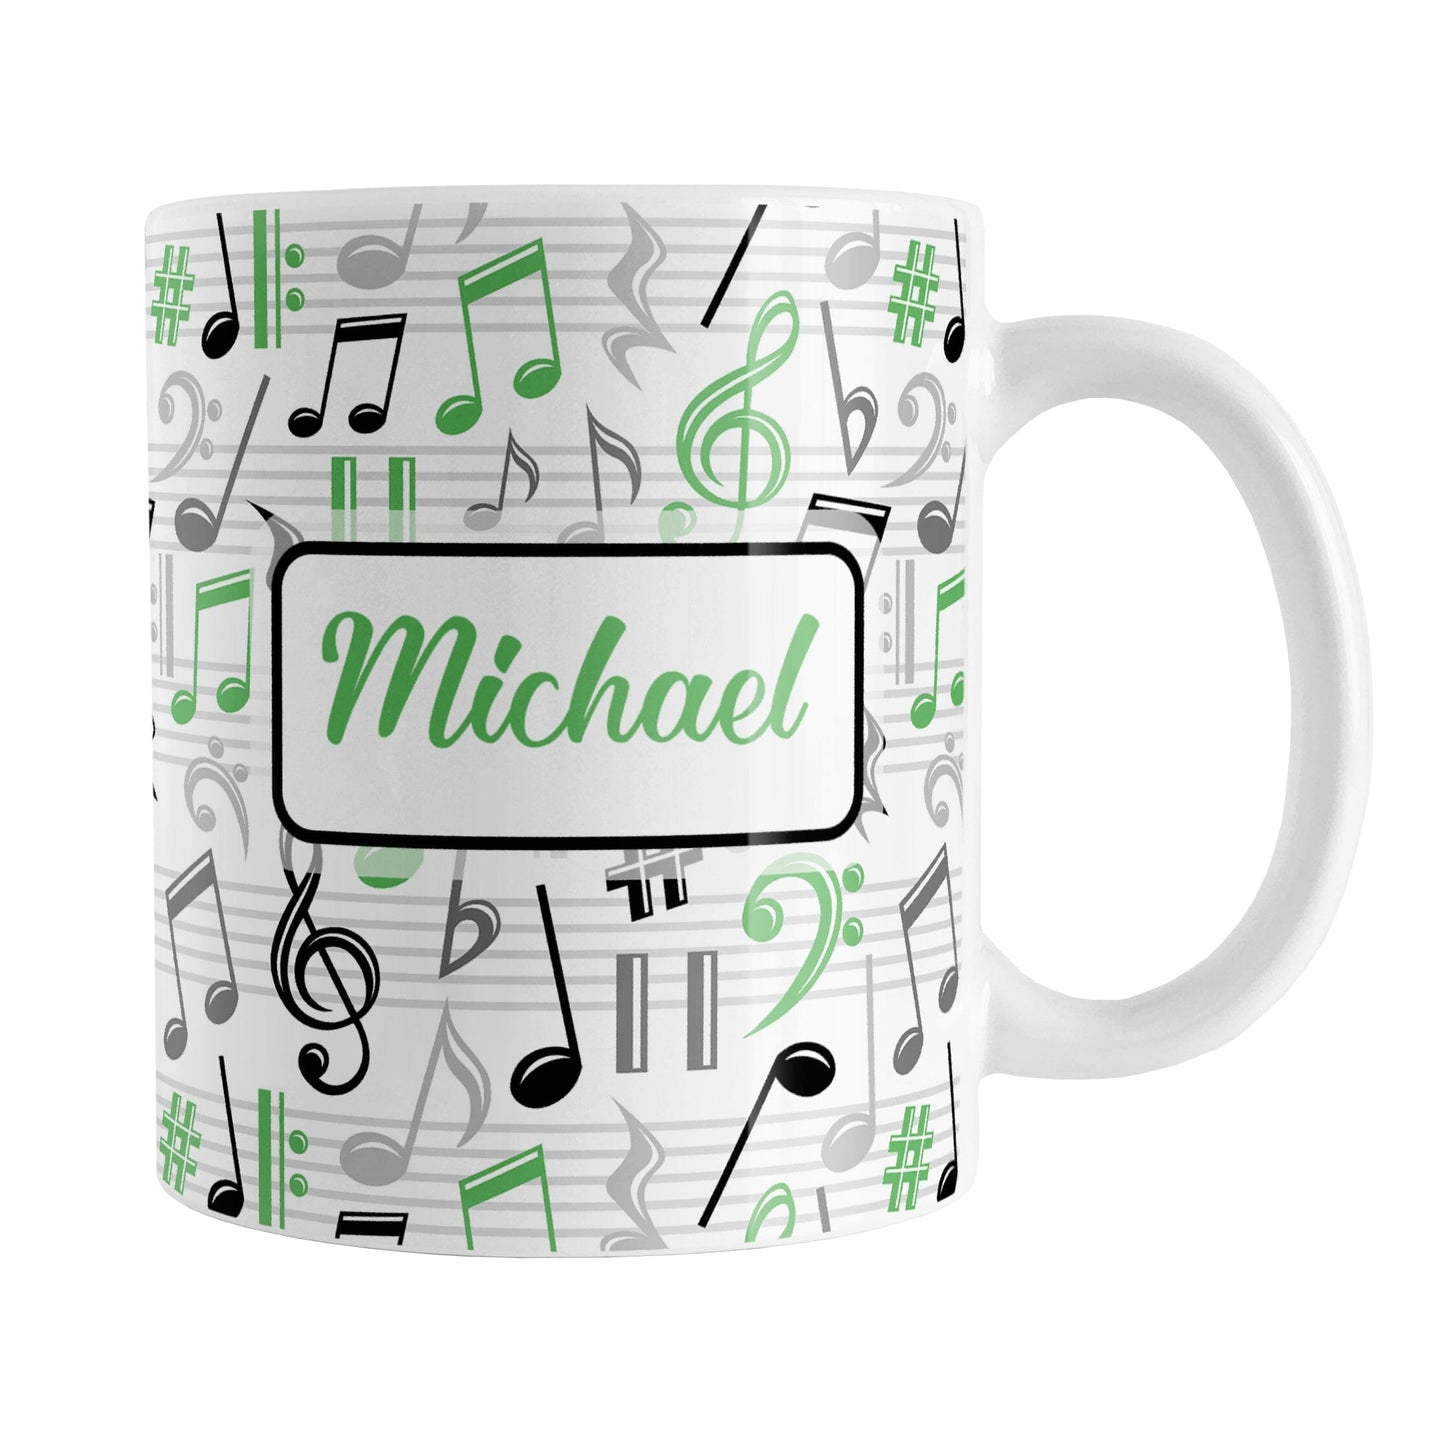 Personalized Green Music Notes Pattern Mug (11oz) at Amy's Coffee Mugs. A ceramic coffee mug designed with music notes and symbols in green, black, and gray in a pattern that wraps around the mug to the handle. Your personalized name is custom printed in a green script font on white over the music pattern design on both sides of the mug.